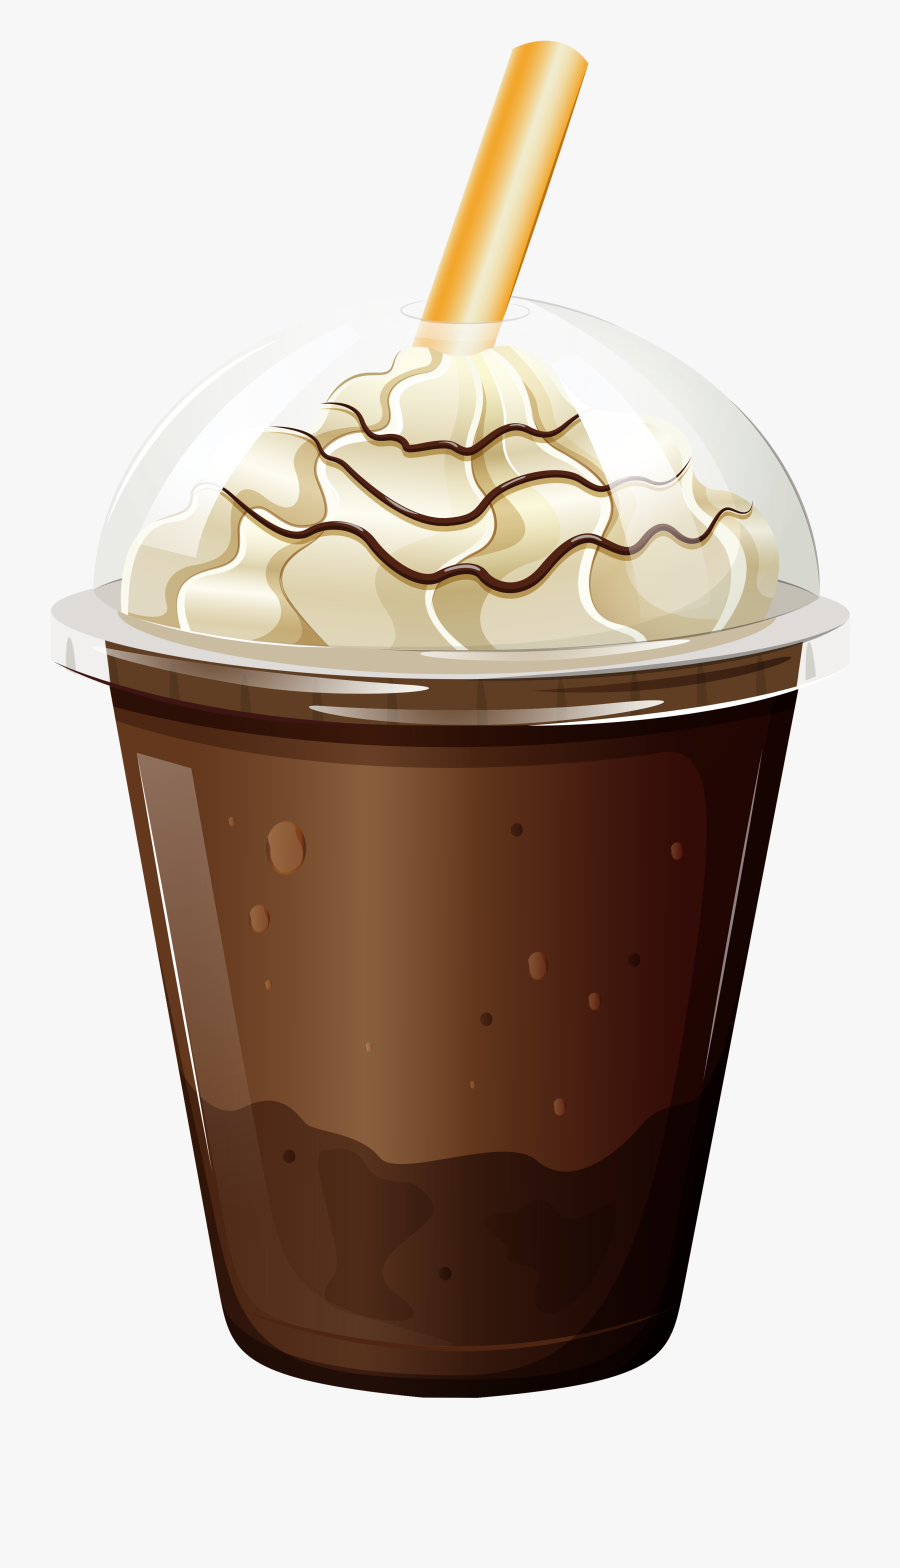 Coffee With Whipped Cream Clipart, Transparent Clipart